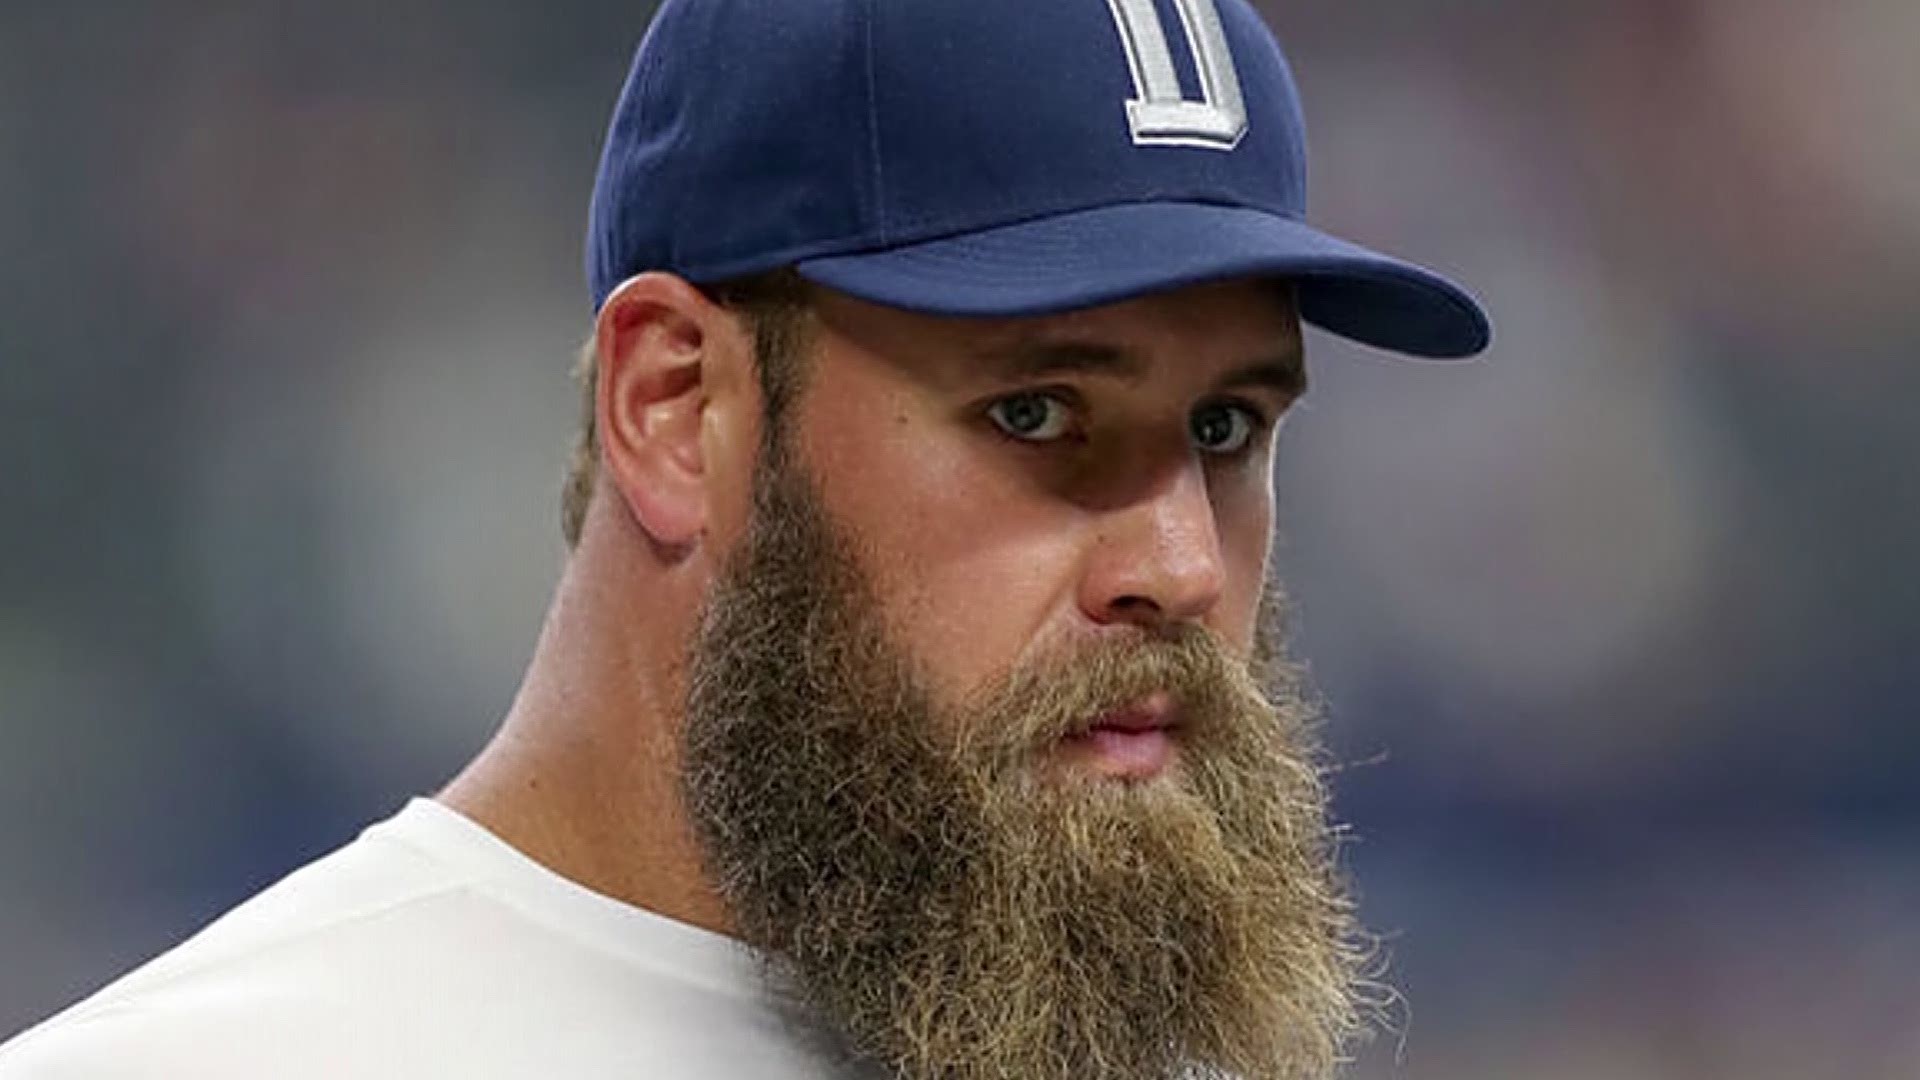 After months of battling Guillain-Barre Syndrome and its after-effects, Cowboys center Travis Frederick details his road back